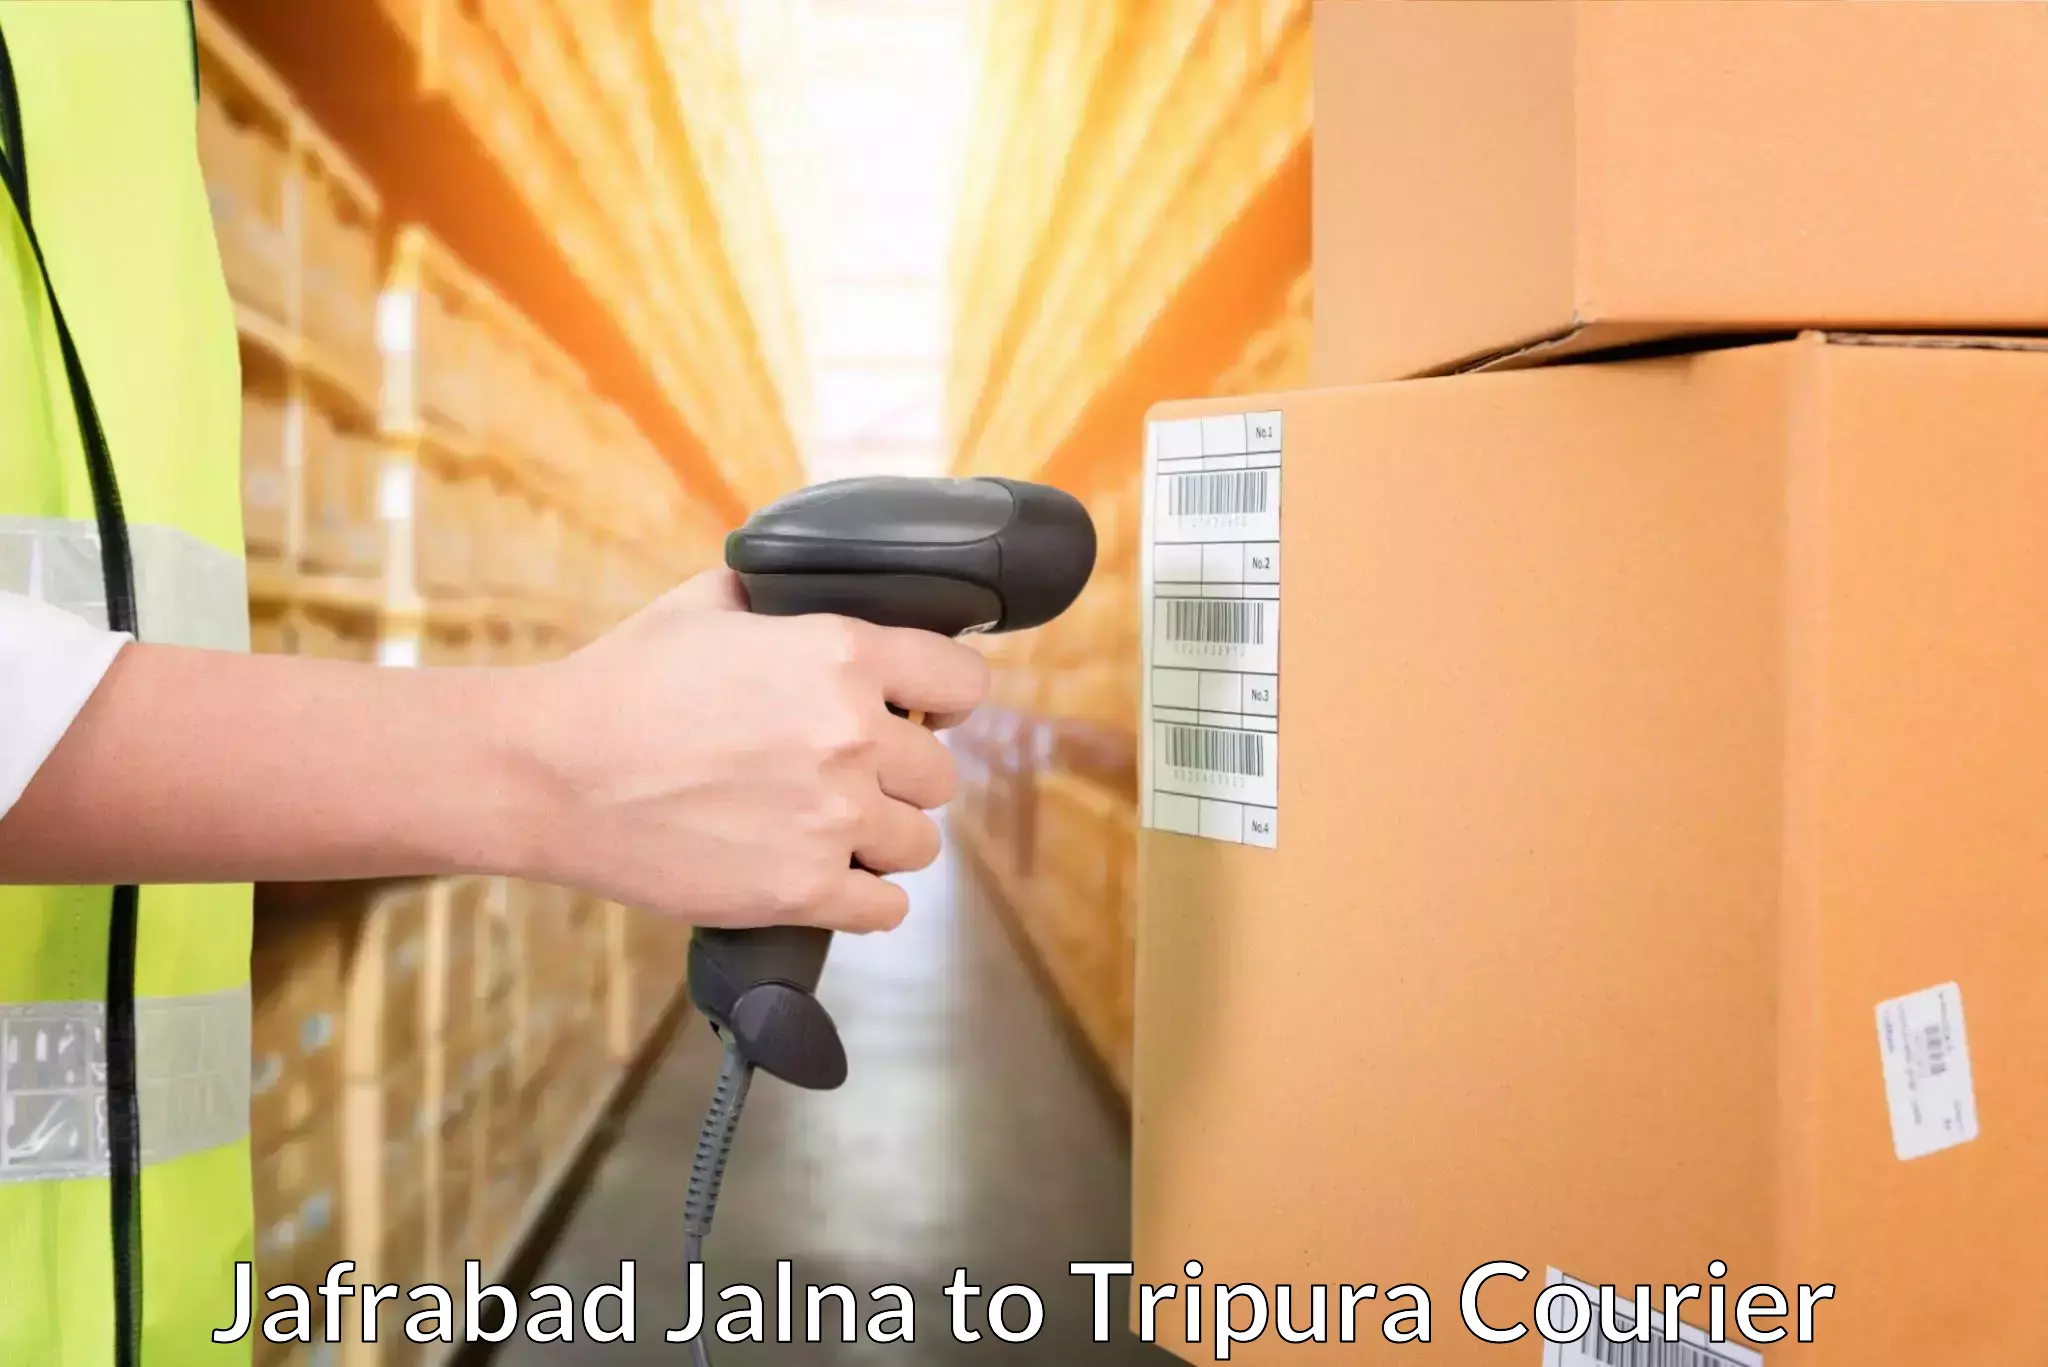 Express delivery solutions in Jafrabad Jalna to Udaipur Tripura